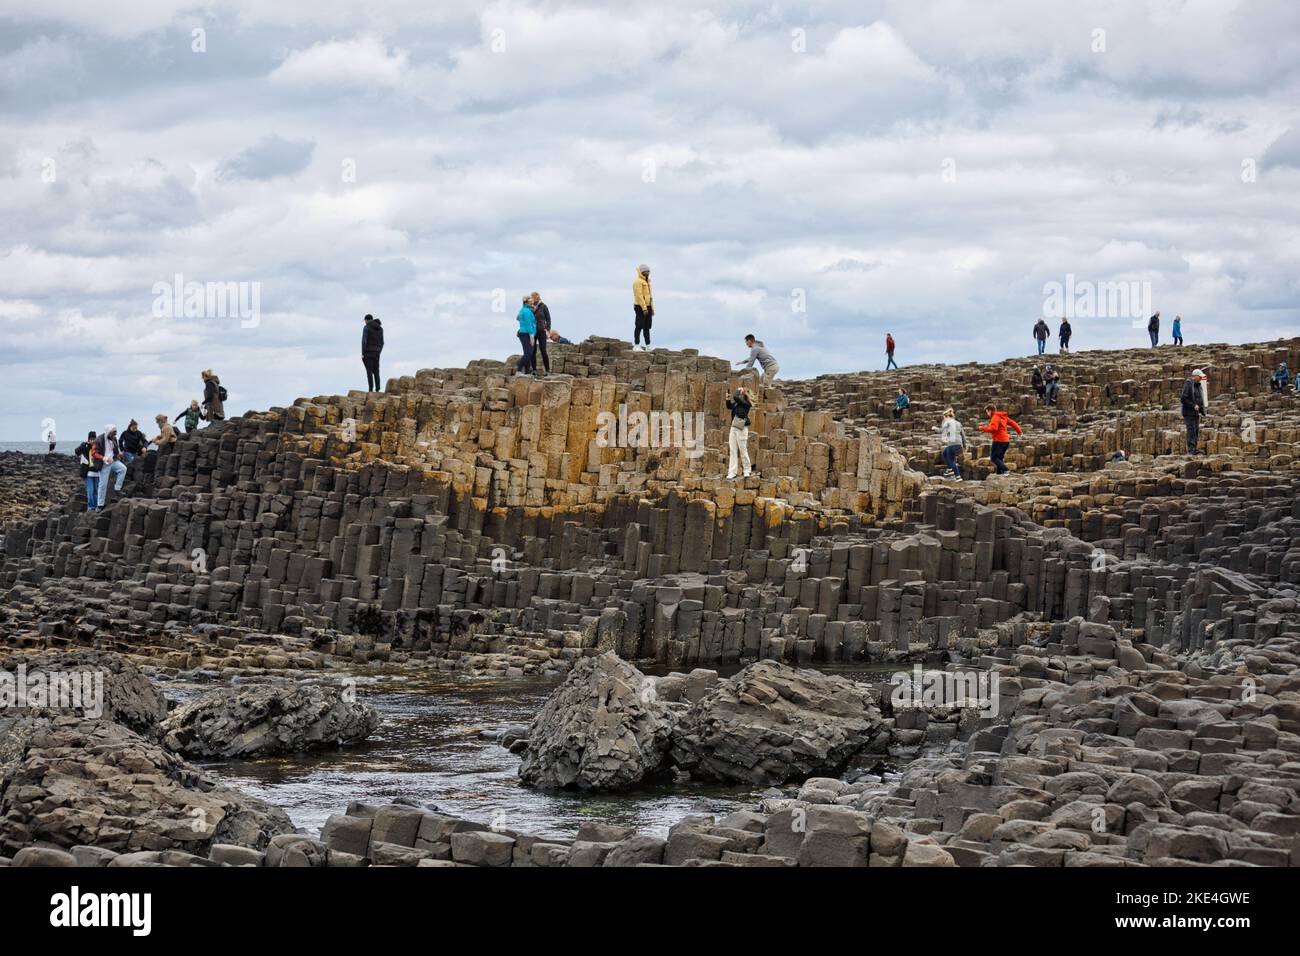 Tourists climbing on the ancient basalt colums of the Giant's Causeway UNESCO World Heritage Site, Causeway Coast, County Antrim, Northern Ireland Stock Photo